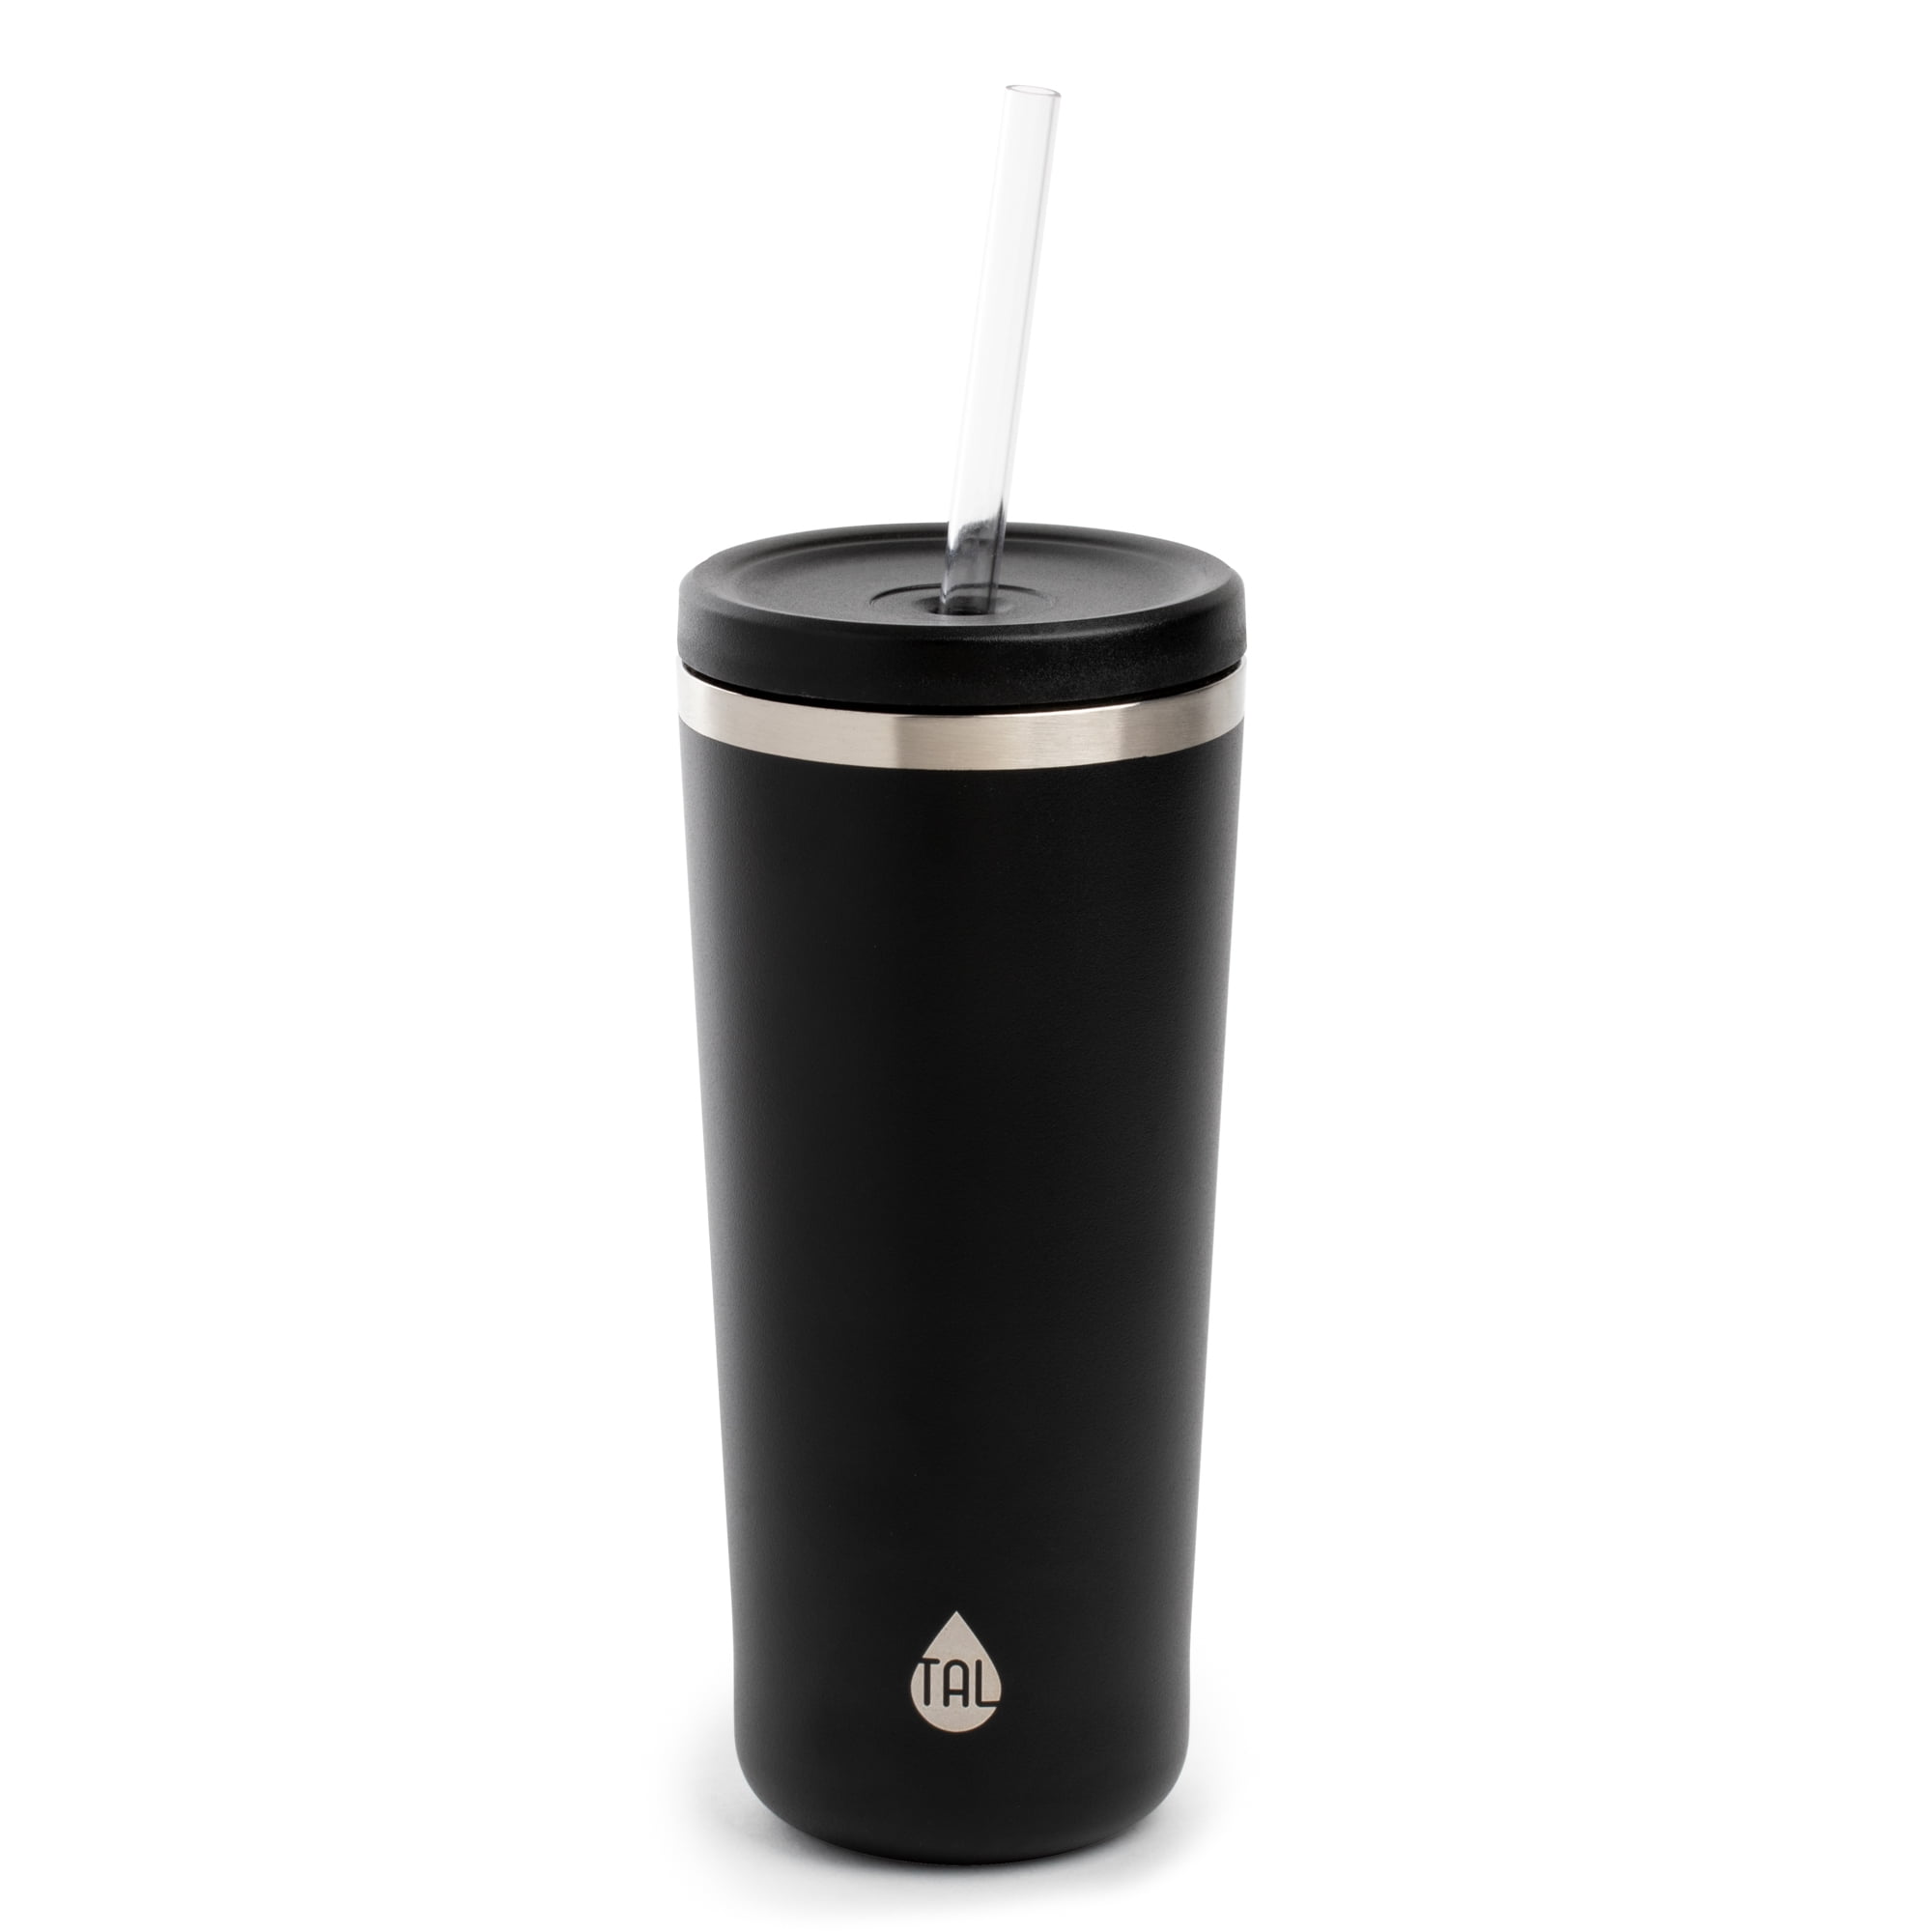 Tal 24 Ounce Black Stainless Steel Ranger Tumbler with Tritan Straw